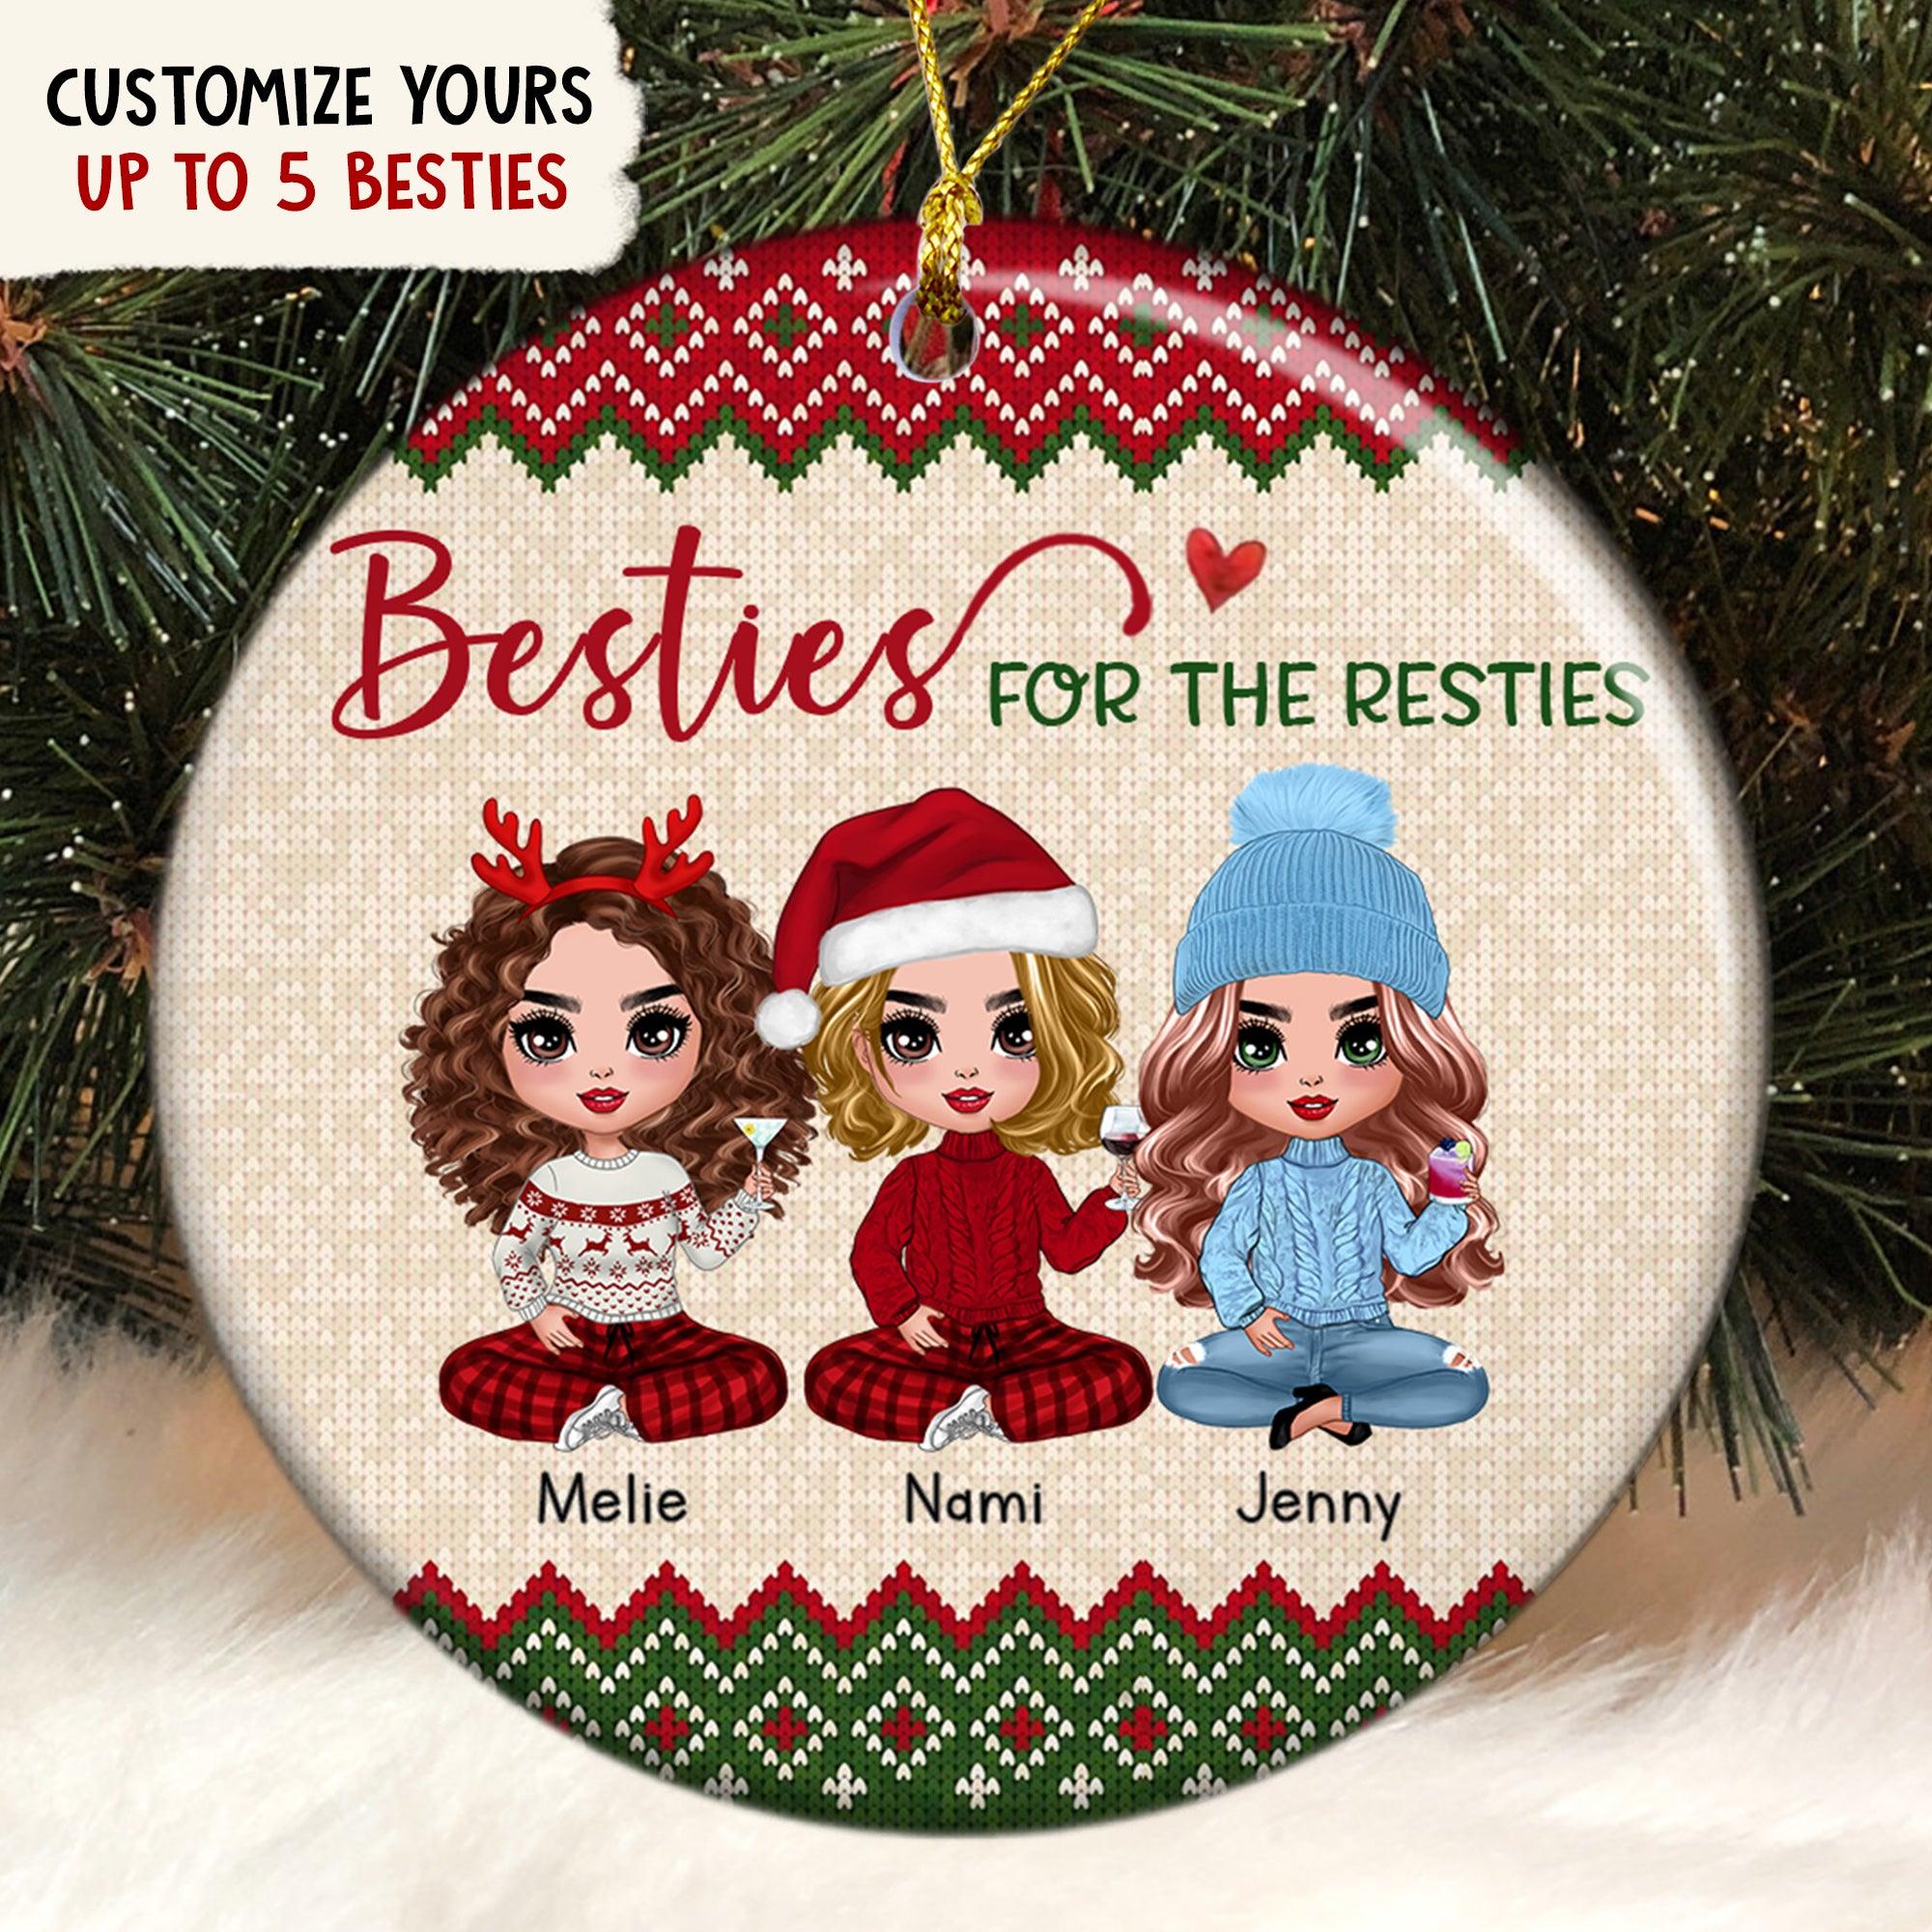 Cross Stitch Ornaments Personalized for Christmas